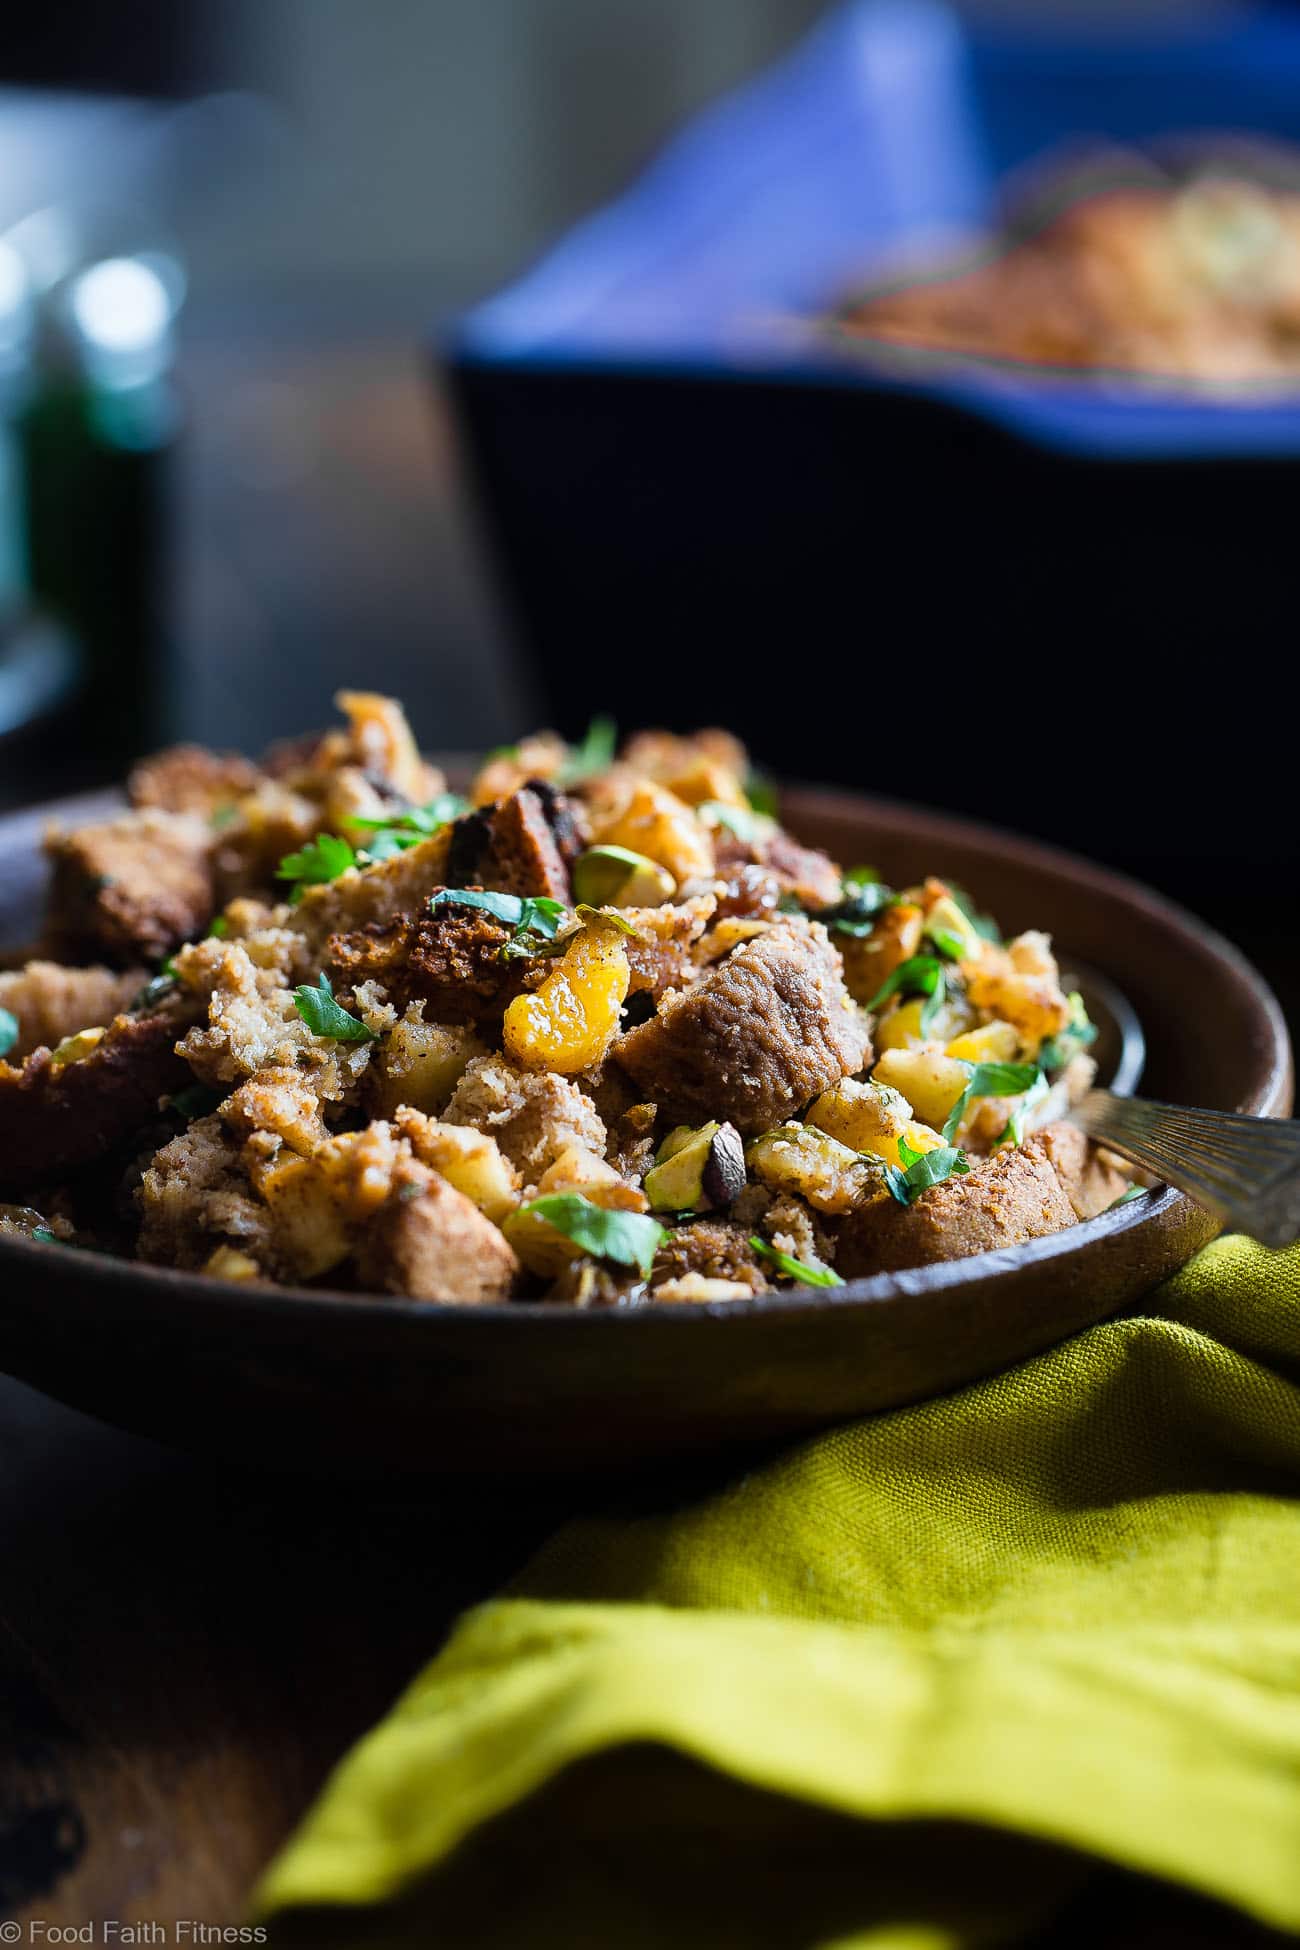 Moroccan Gluten Free Stuffing  -  This simple gluten free stuffing is made with spicy-sweet Moroccan flavors, apples and dried fruit! It's a healthy, dairy-free twist on a classic side dish that's perfect for Thanksgiving! | Foodfaithfitness.com | @FoodFaithFit